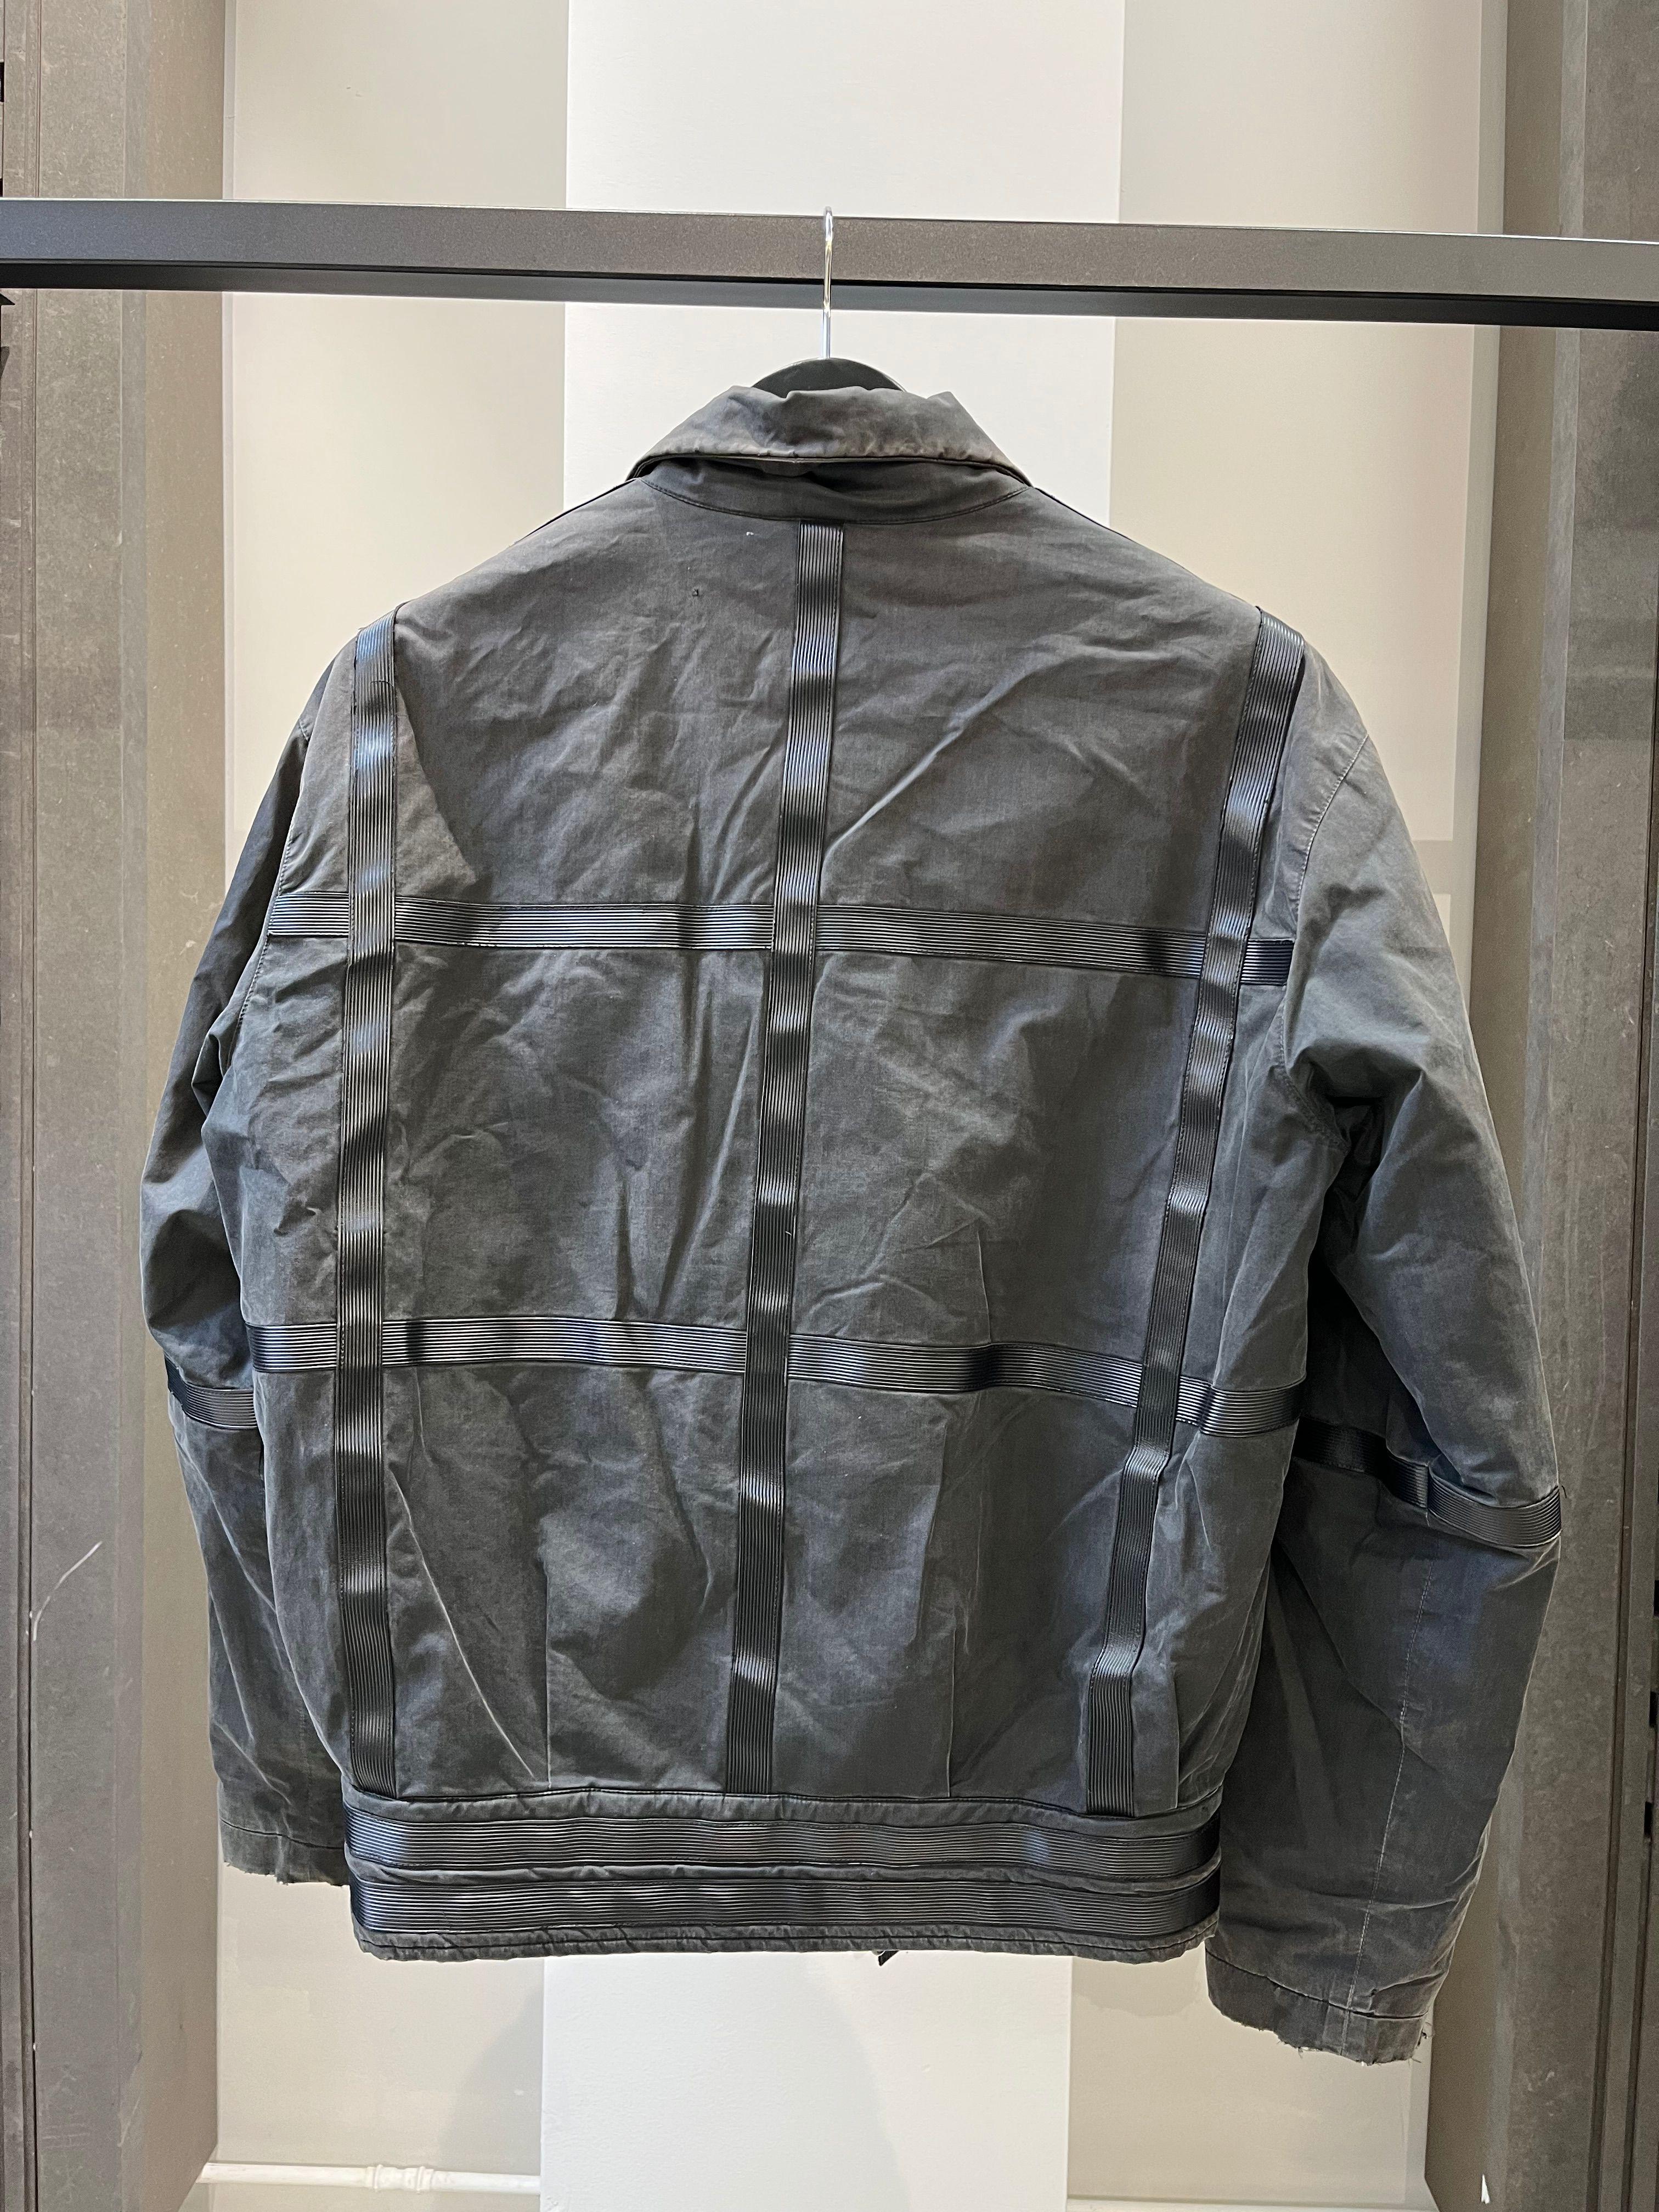 Raf Simons
AW02 Virginia Creeper Bondage Strap Jacket
Size 46

Absolutely fantastic Raf Simons jacket from the iconic AW02 Virginia Creeper collection. In good condition, only missing a metal d ring. This can be easily repaired. Tagged a size 46 and